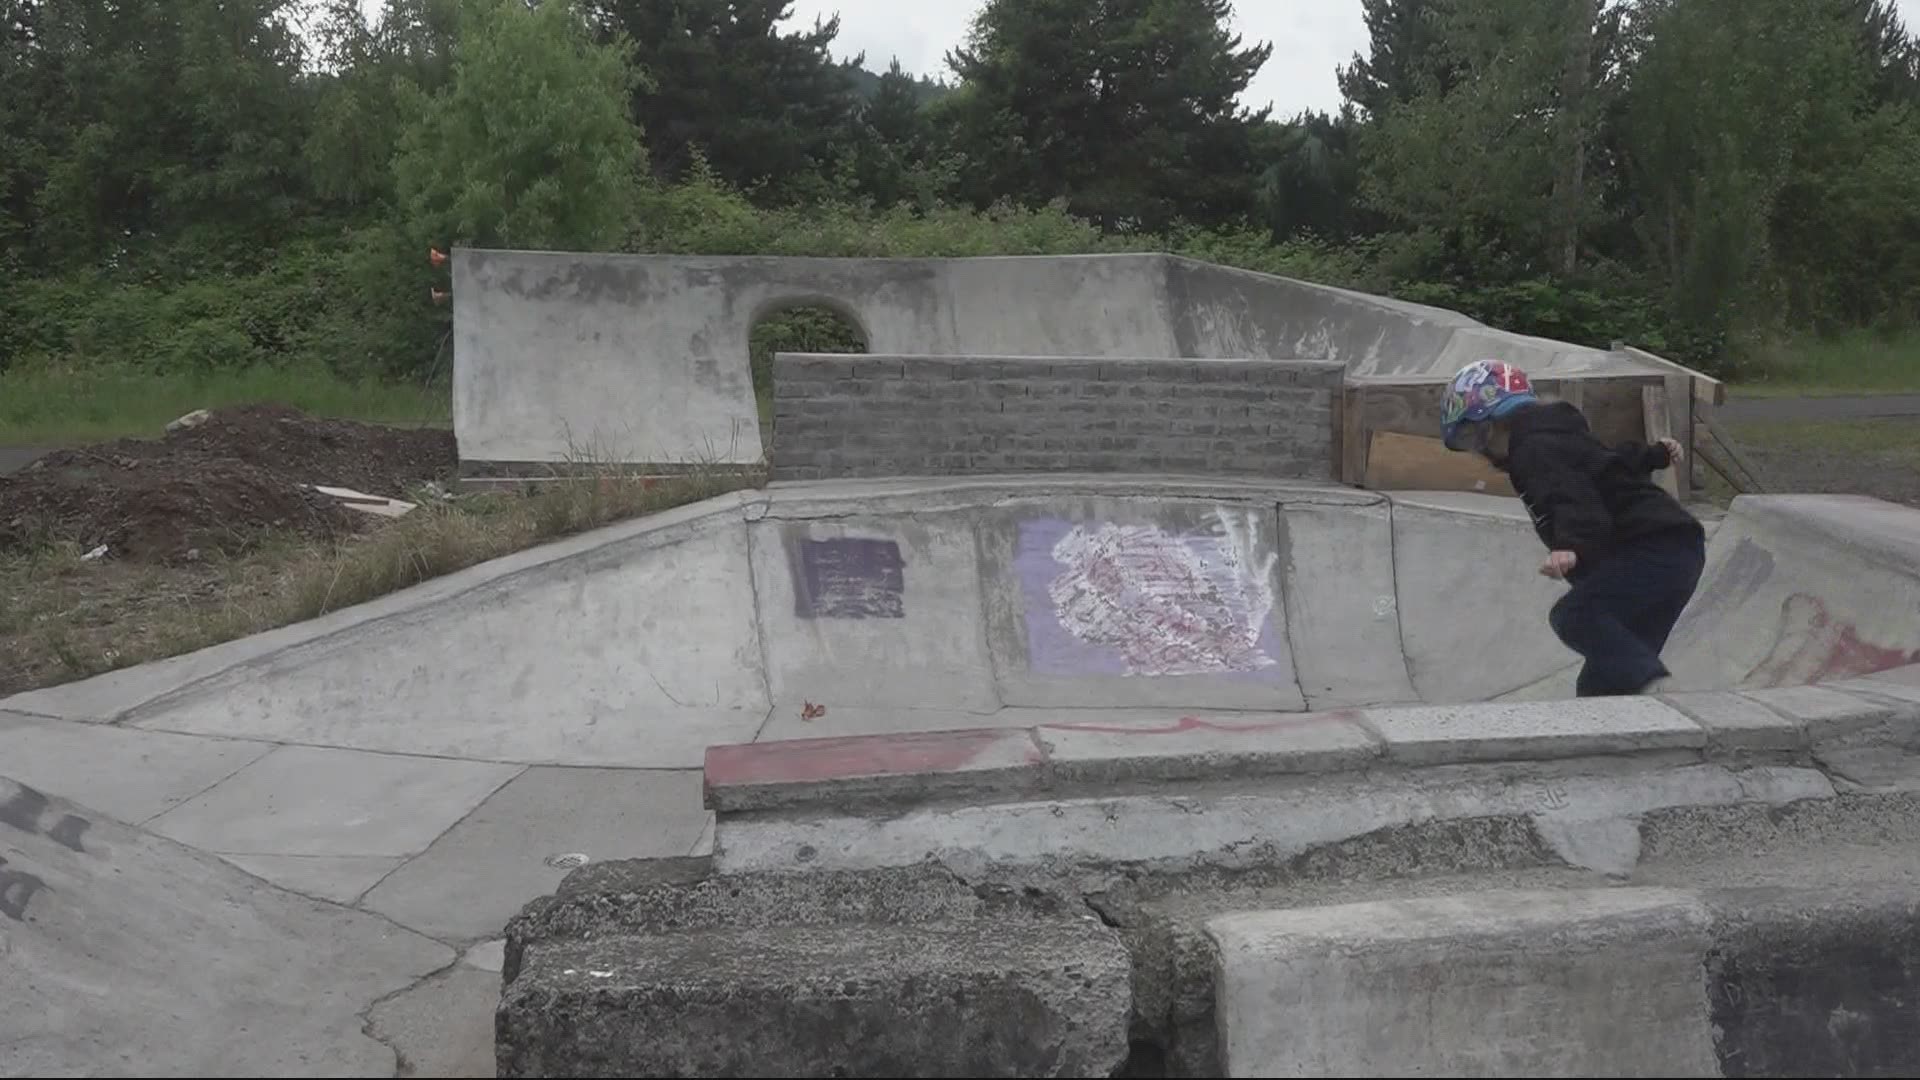 The builders of a community skate park in Southeast Portland’s Lents neighborhood are fighting to keep it from being dismantled. Bryant Clerkley reports.